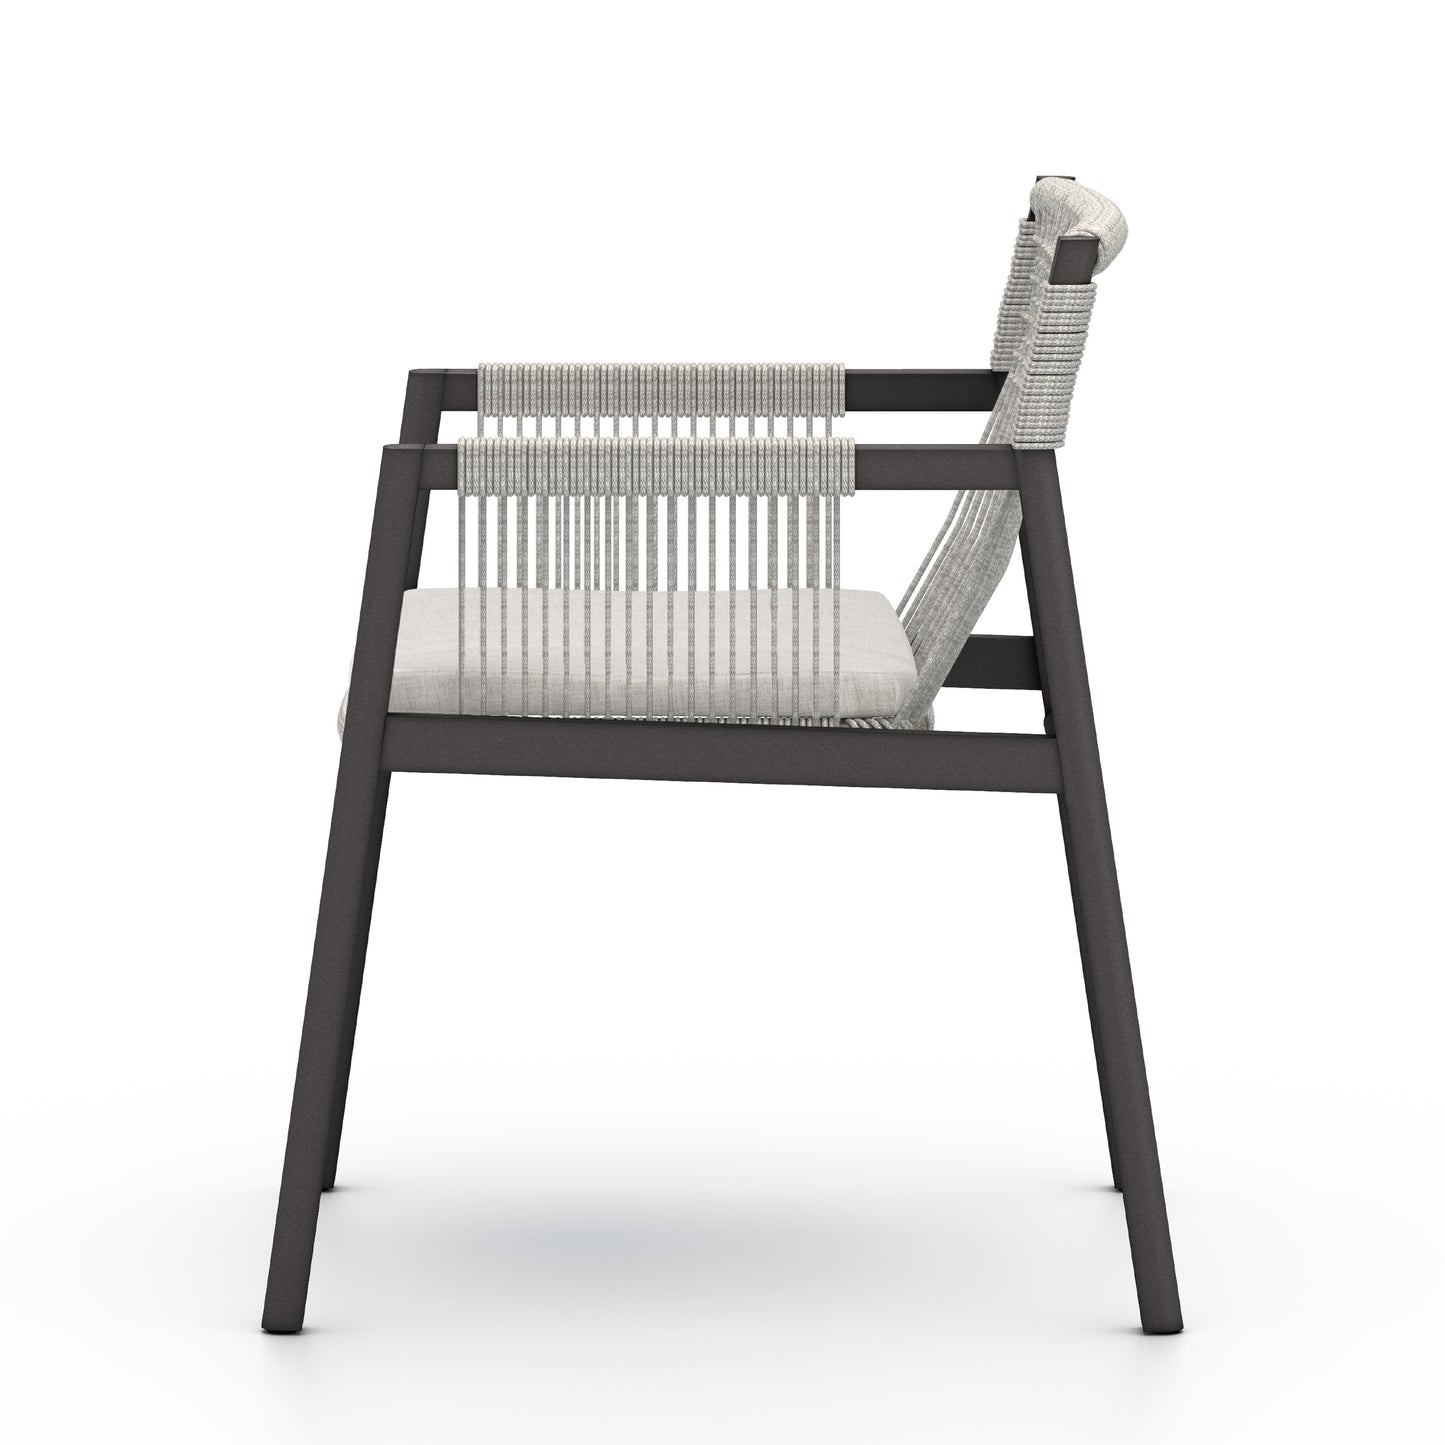 Shuman Outdoor Dining Chair Outdoor Chairs Four Hands     Four Hands, Mid Century Modern Furniture, Old Bones Furniture Company, Old Bones Co, Modern Mid Century, Designer Furniture, https://www.oldbonesco.com/